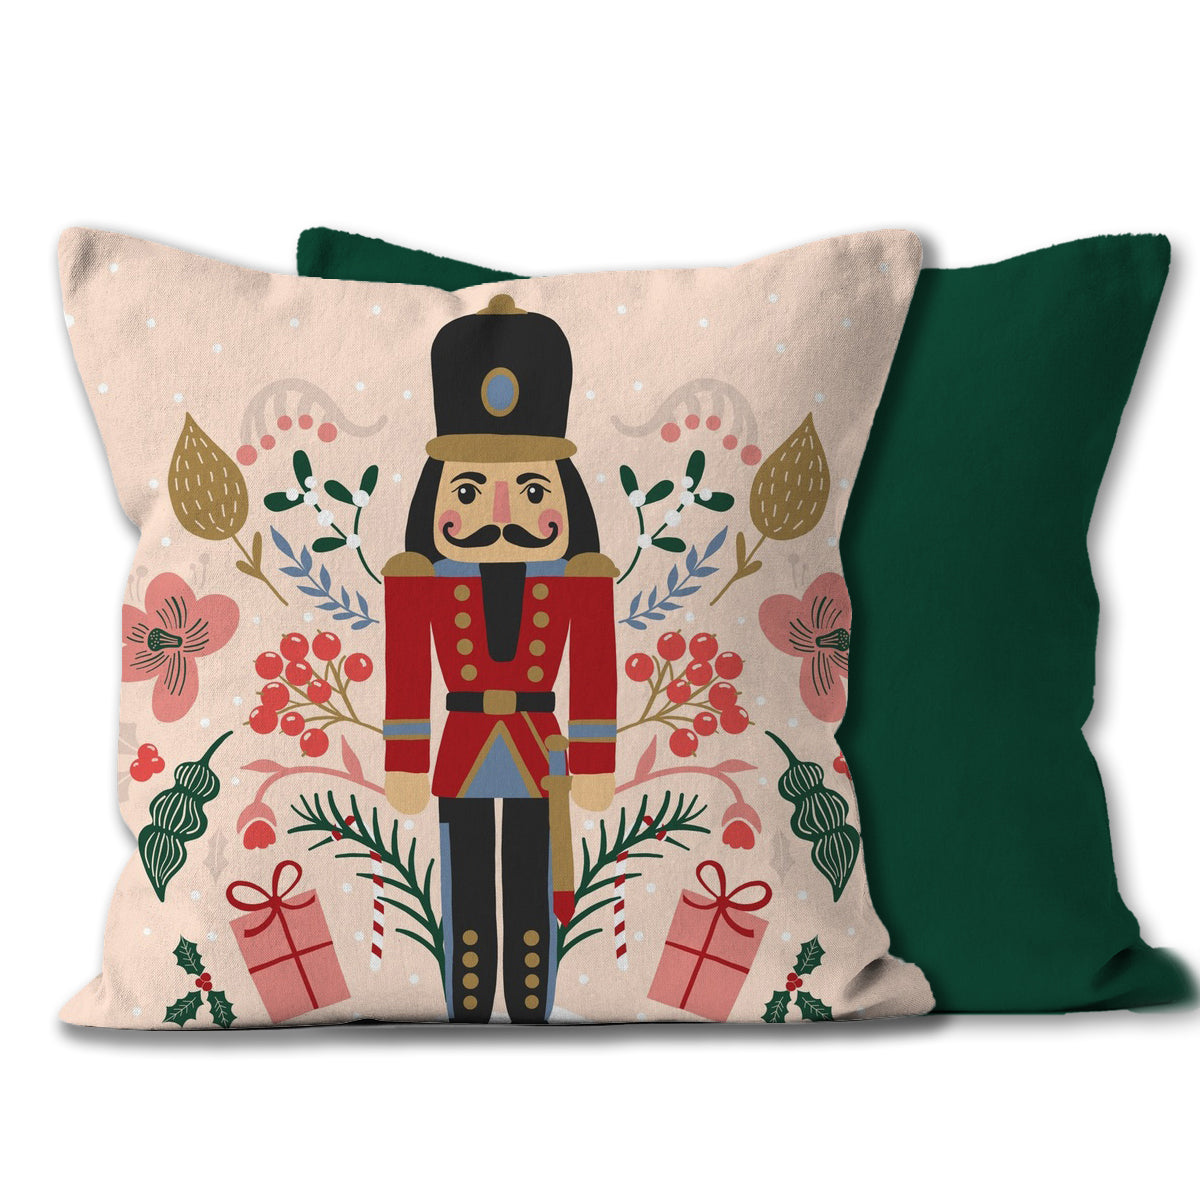 Christmas Nutcracker Cushion or Throw Pillow.  Toy Soldier in his red uniform surrounded by festive florals.  Green Back